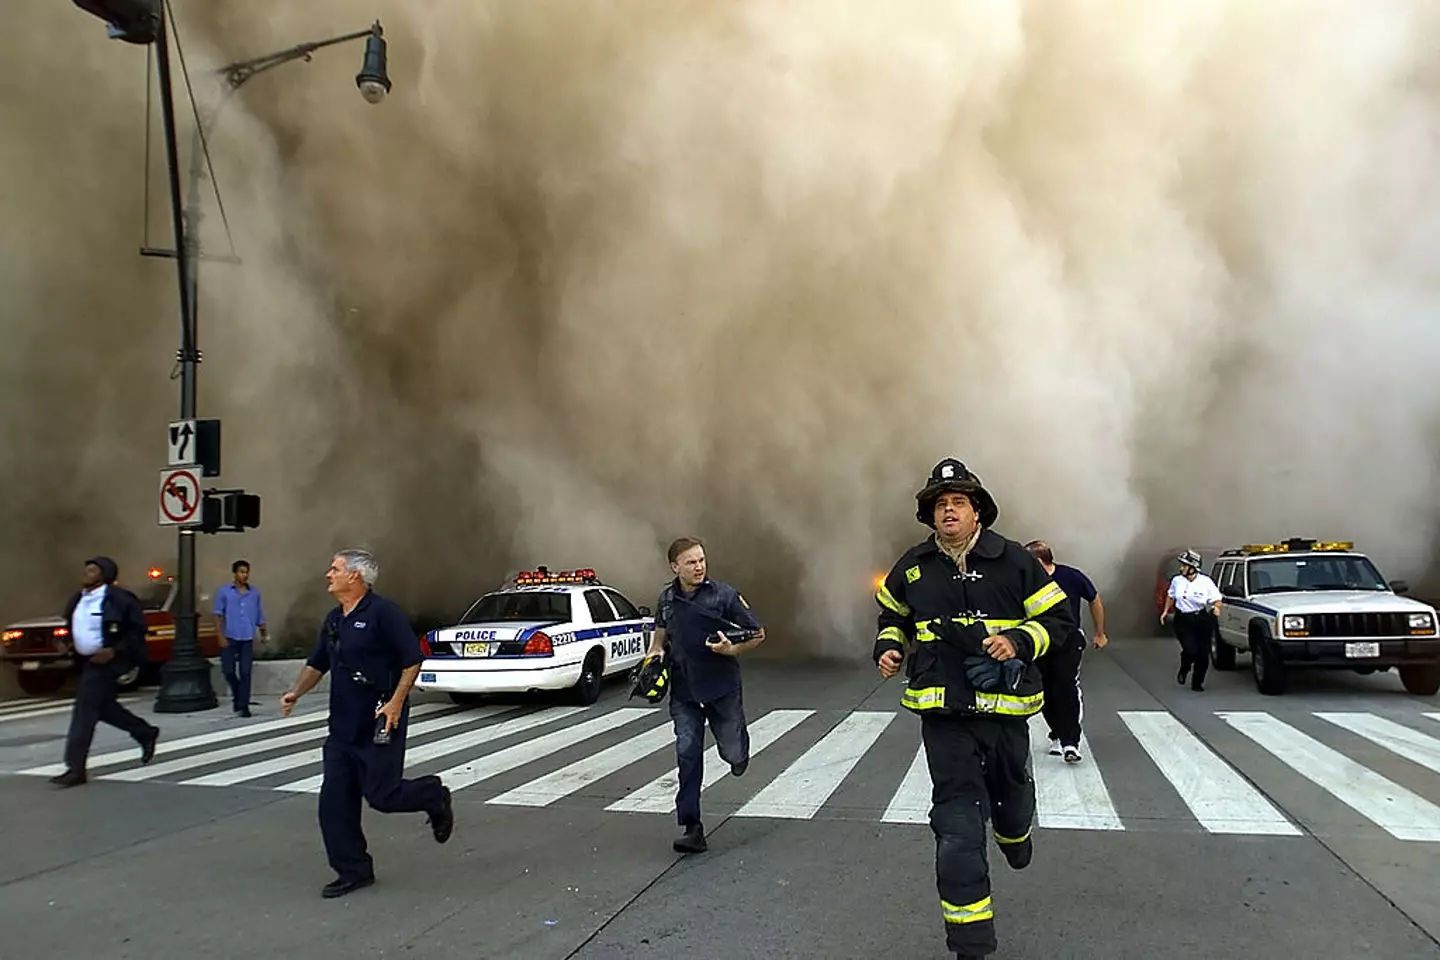 Building 7 collapsed hours after both the North and South Towers fell. Cedit: Jose Jimenez/Primera Hora/Getty Images